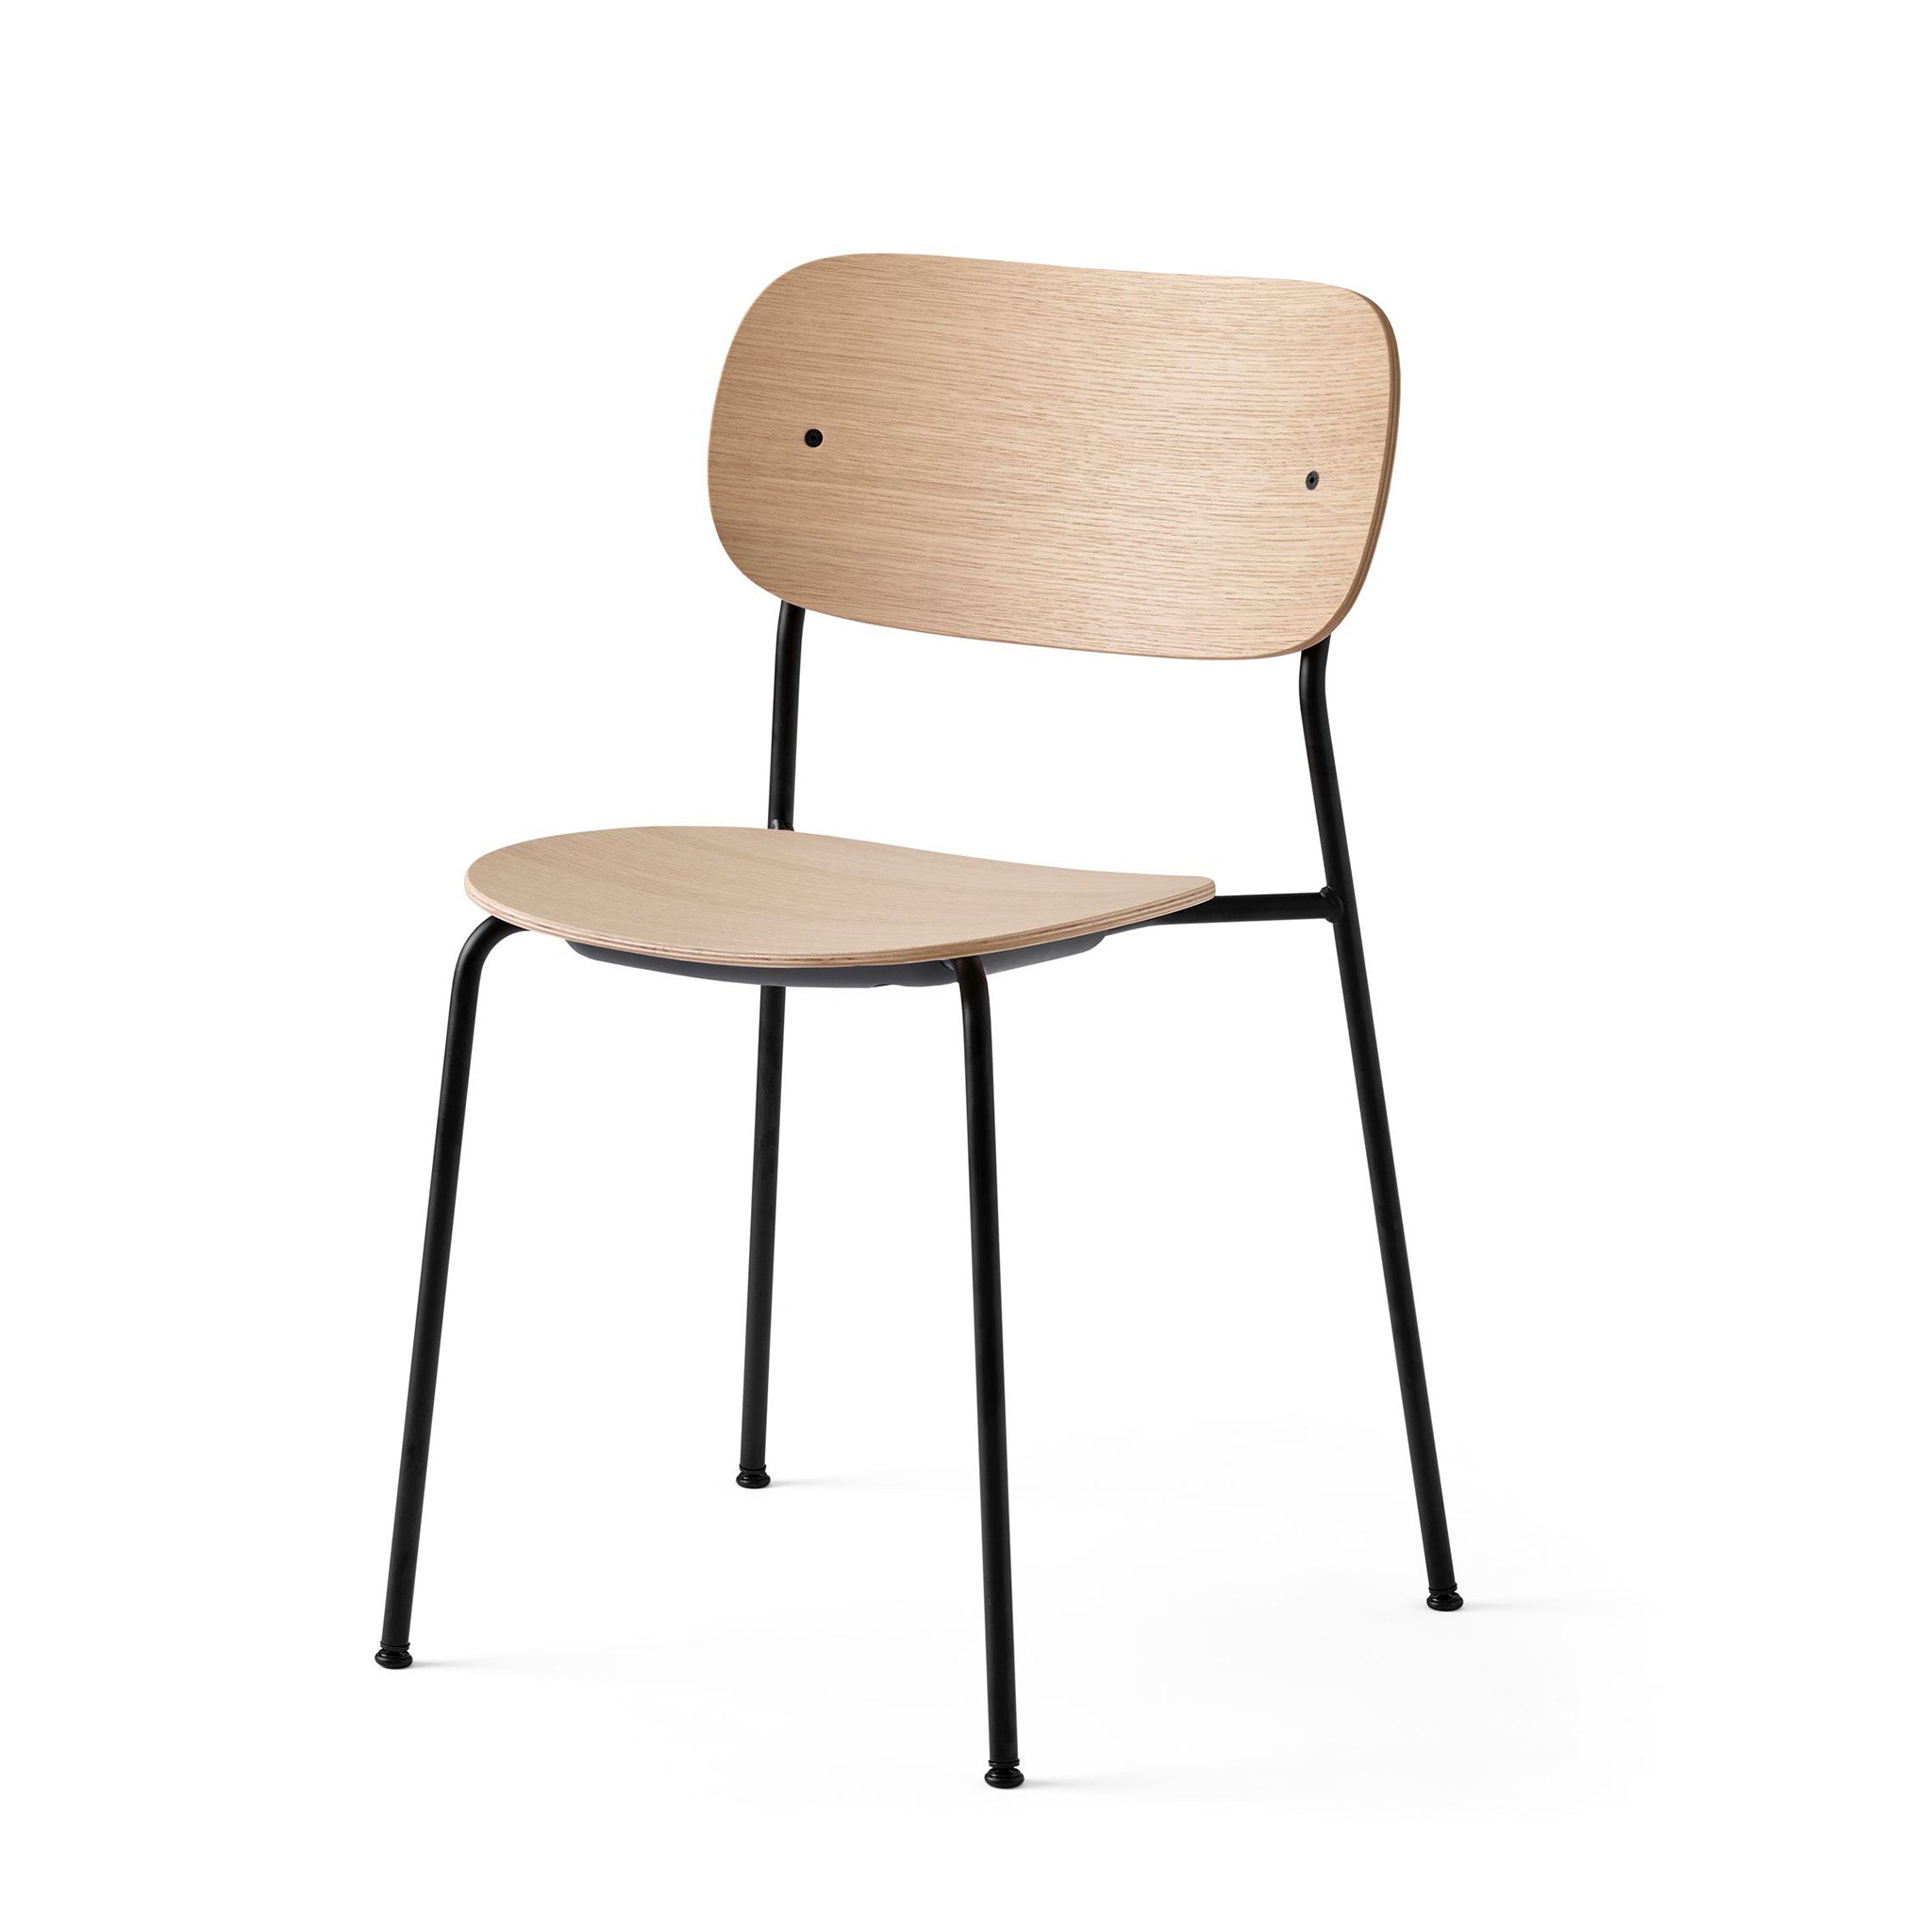 Co Chair, Un-Upholstered by Norm Architects & Els Van Hoorebeeck